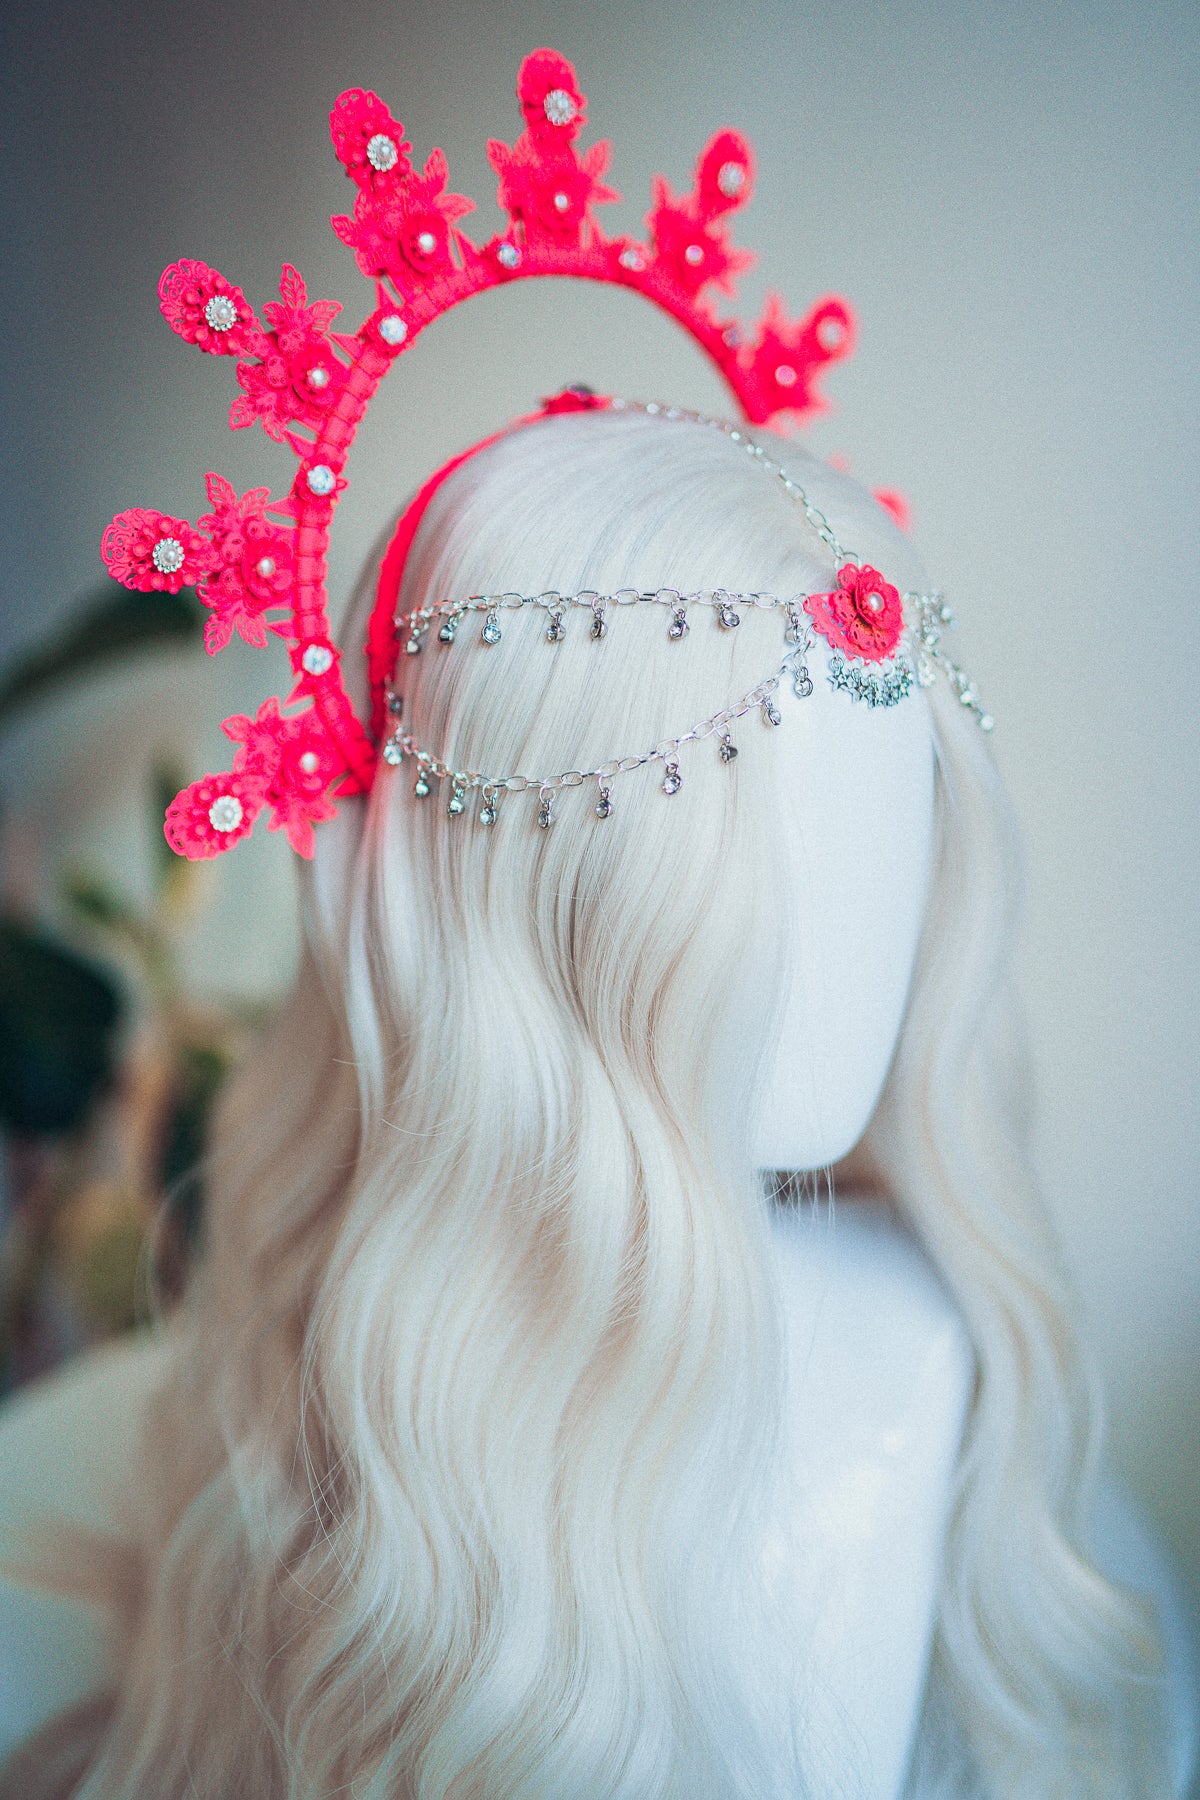 Pink Halo Festival Crown